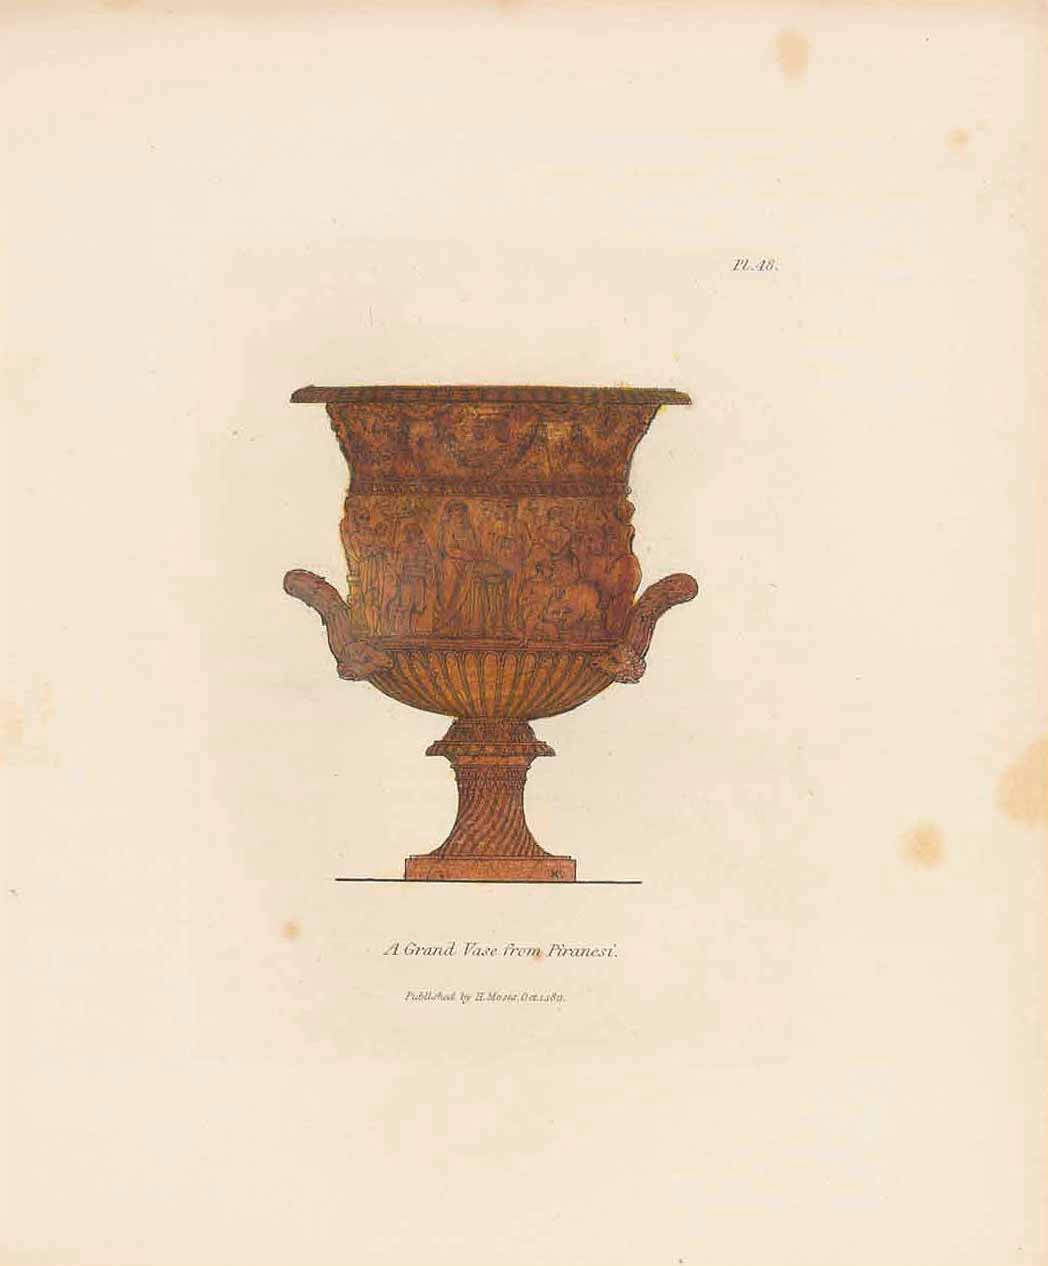 Plate 48 - Hand-colored copper etching  "A Grand Vase from Piranesi"  Published in "Select Greek and Roman Antiquities from Vases, Gems and other Objects of the Choicest Workmanship"  By Henry Moses (1781-1870)  London, 1811  Original antique print , interior design, wall decoration, ideas, idea, gift ideas, present, vintage, charming, special, decoration, home interior, living room design